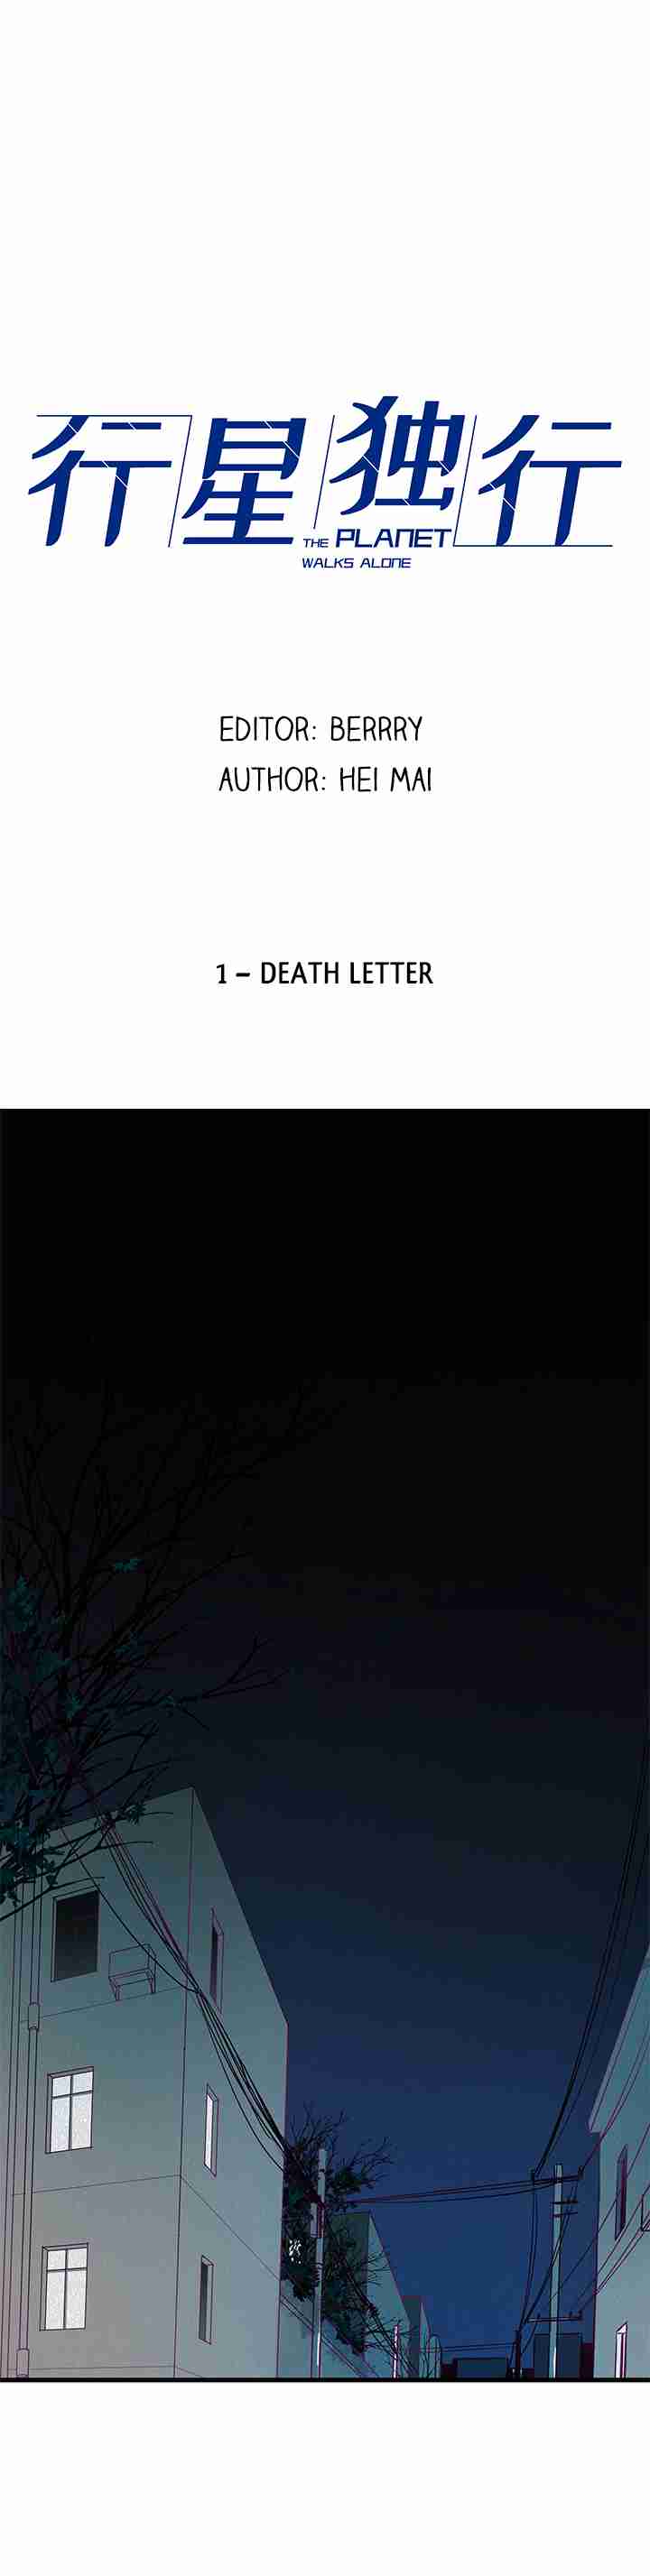 The Planet Walks Alone Ch. 1 Death Letter